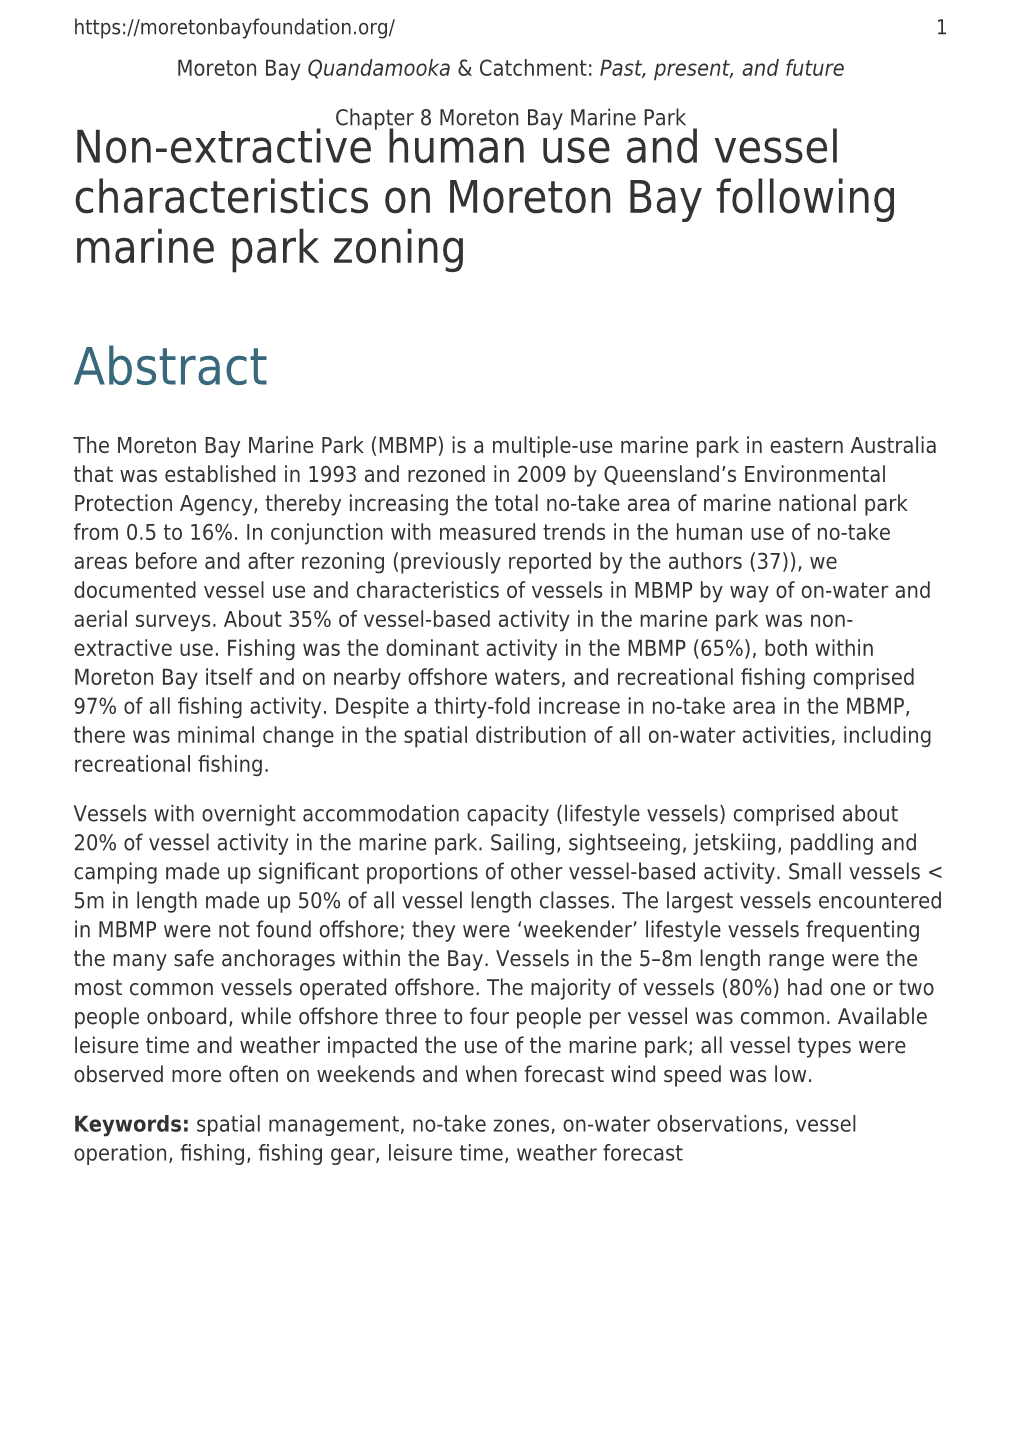 Non-Extractive Human Use and Vessel Characteristics on Moreton Bay Following Marine Park Zoning